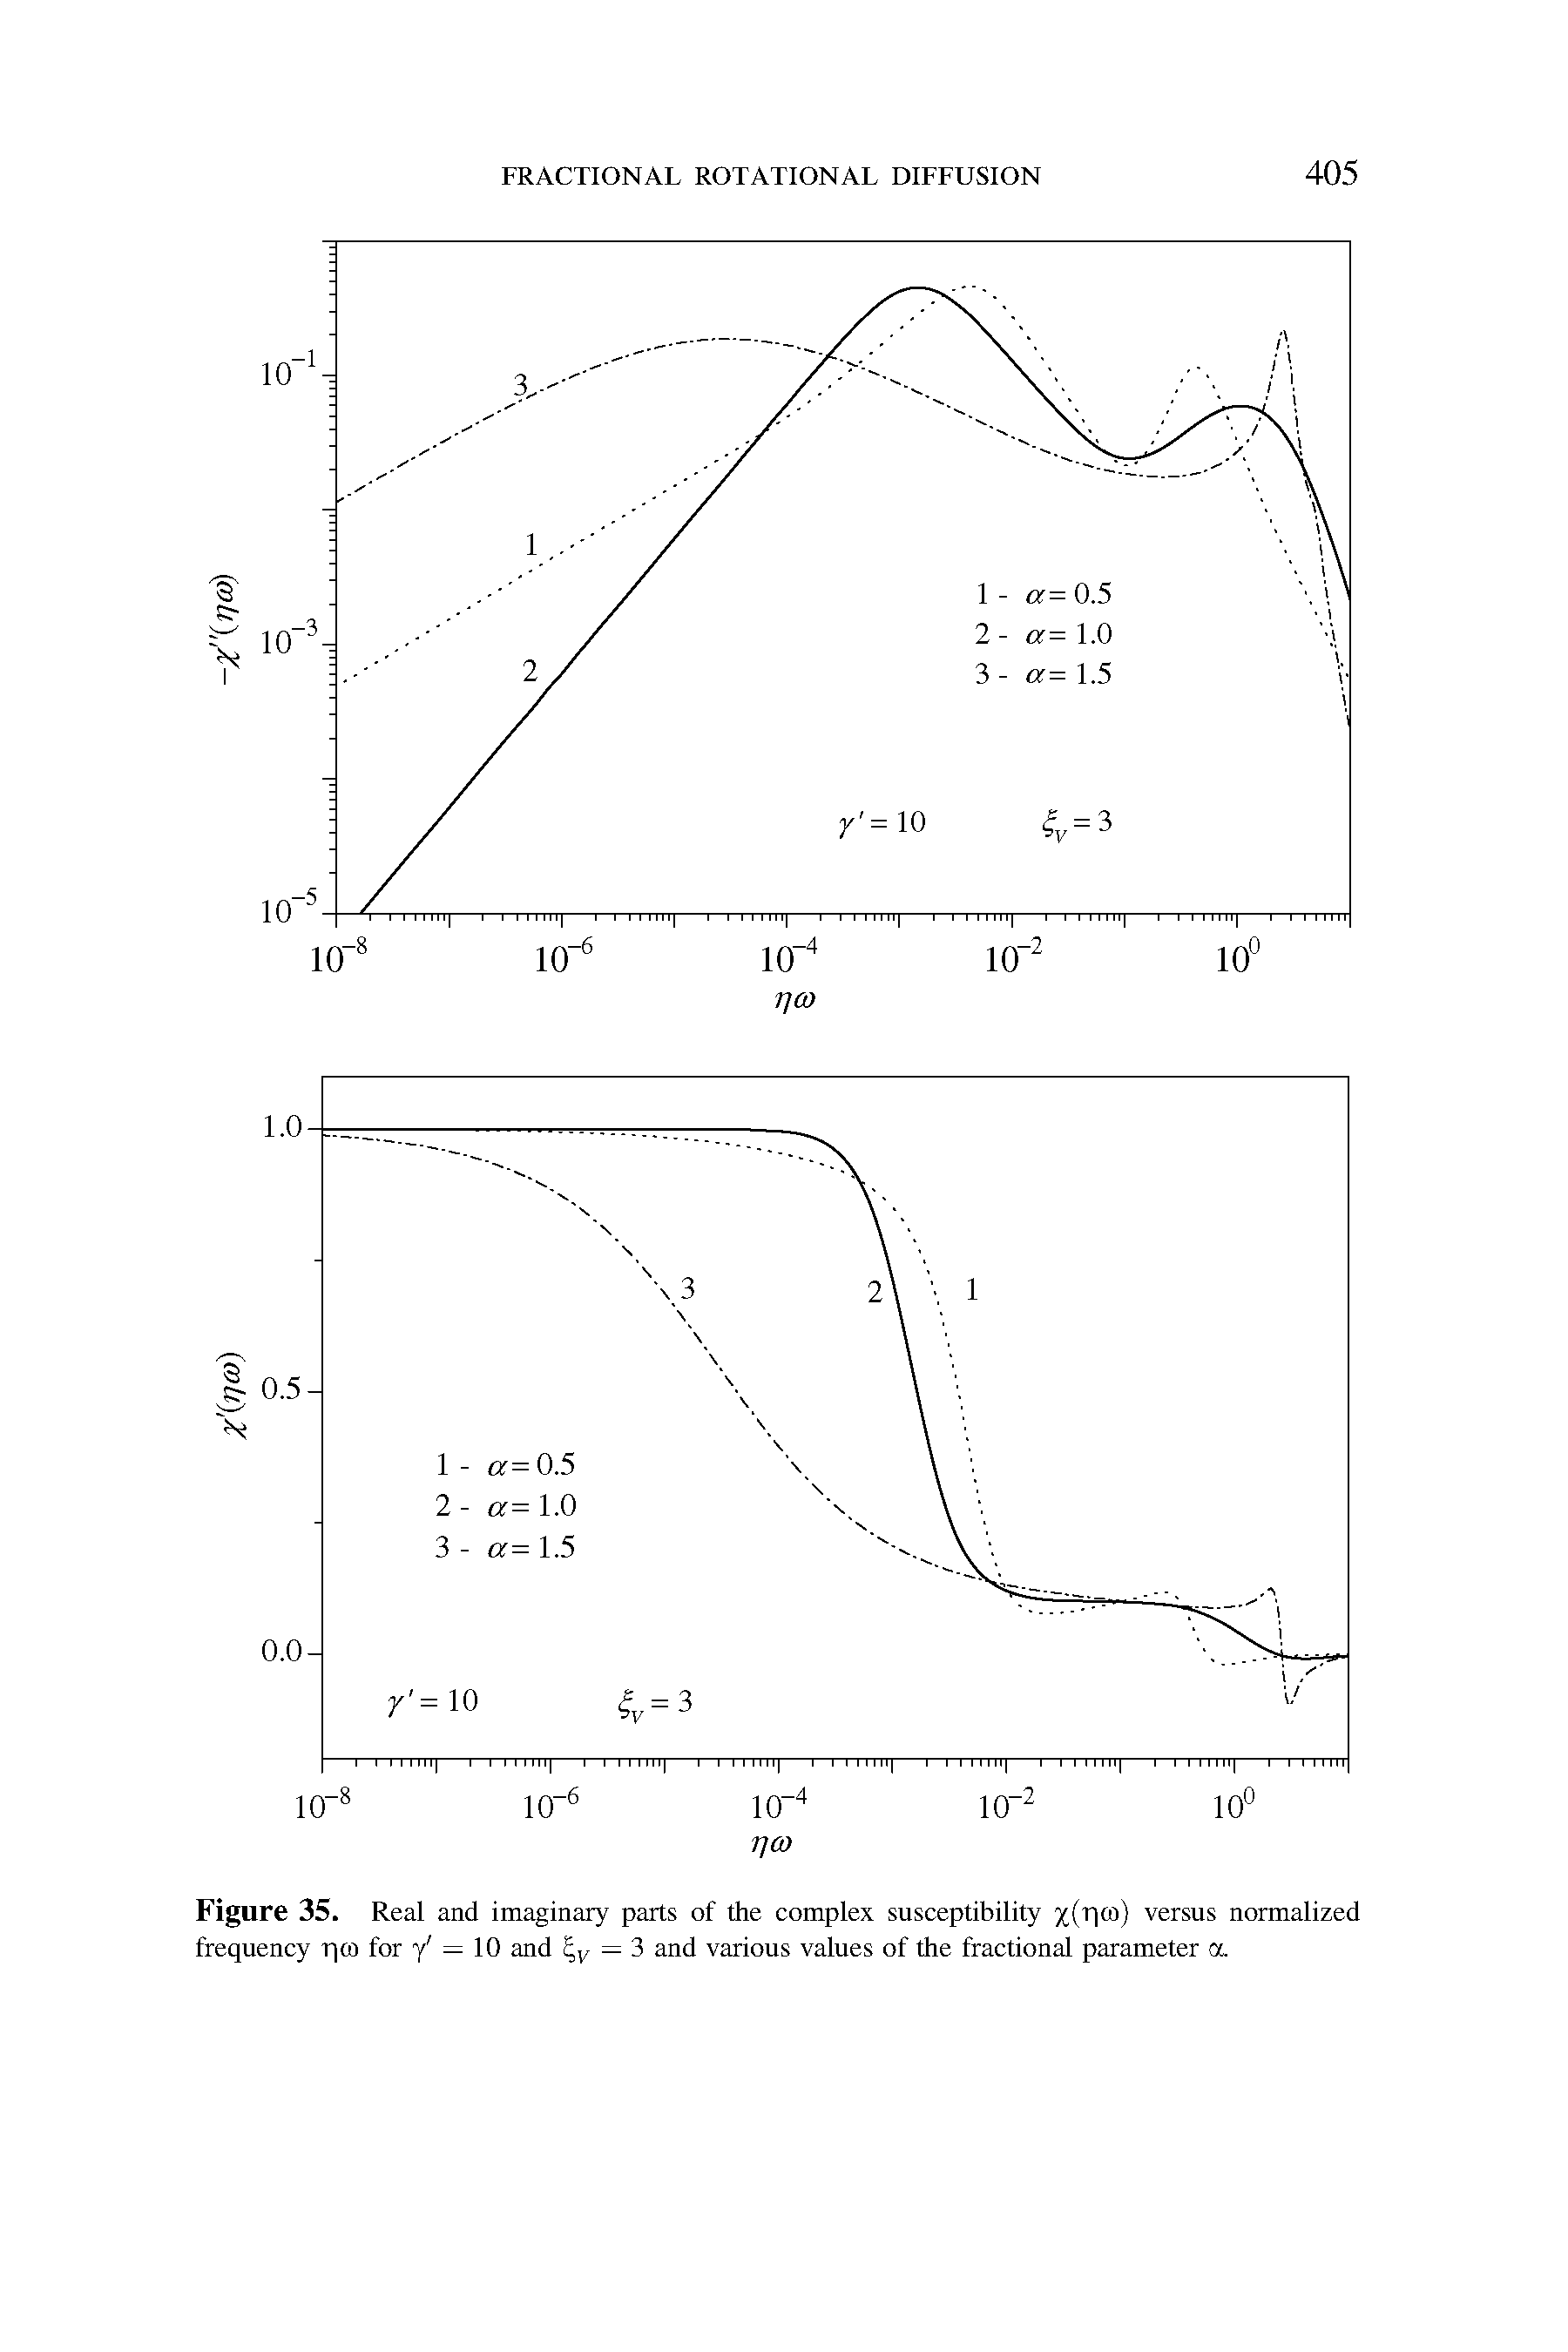 Figure 35. Real and imaginary parts of the complex susceptibility x(rlco) versus normalized frequency r C0 for y — 10 and — 3 and various values of the fractional parameter a.